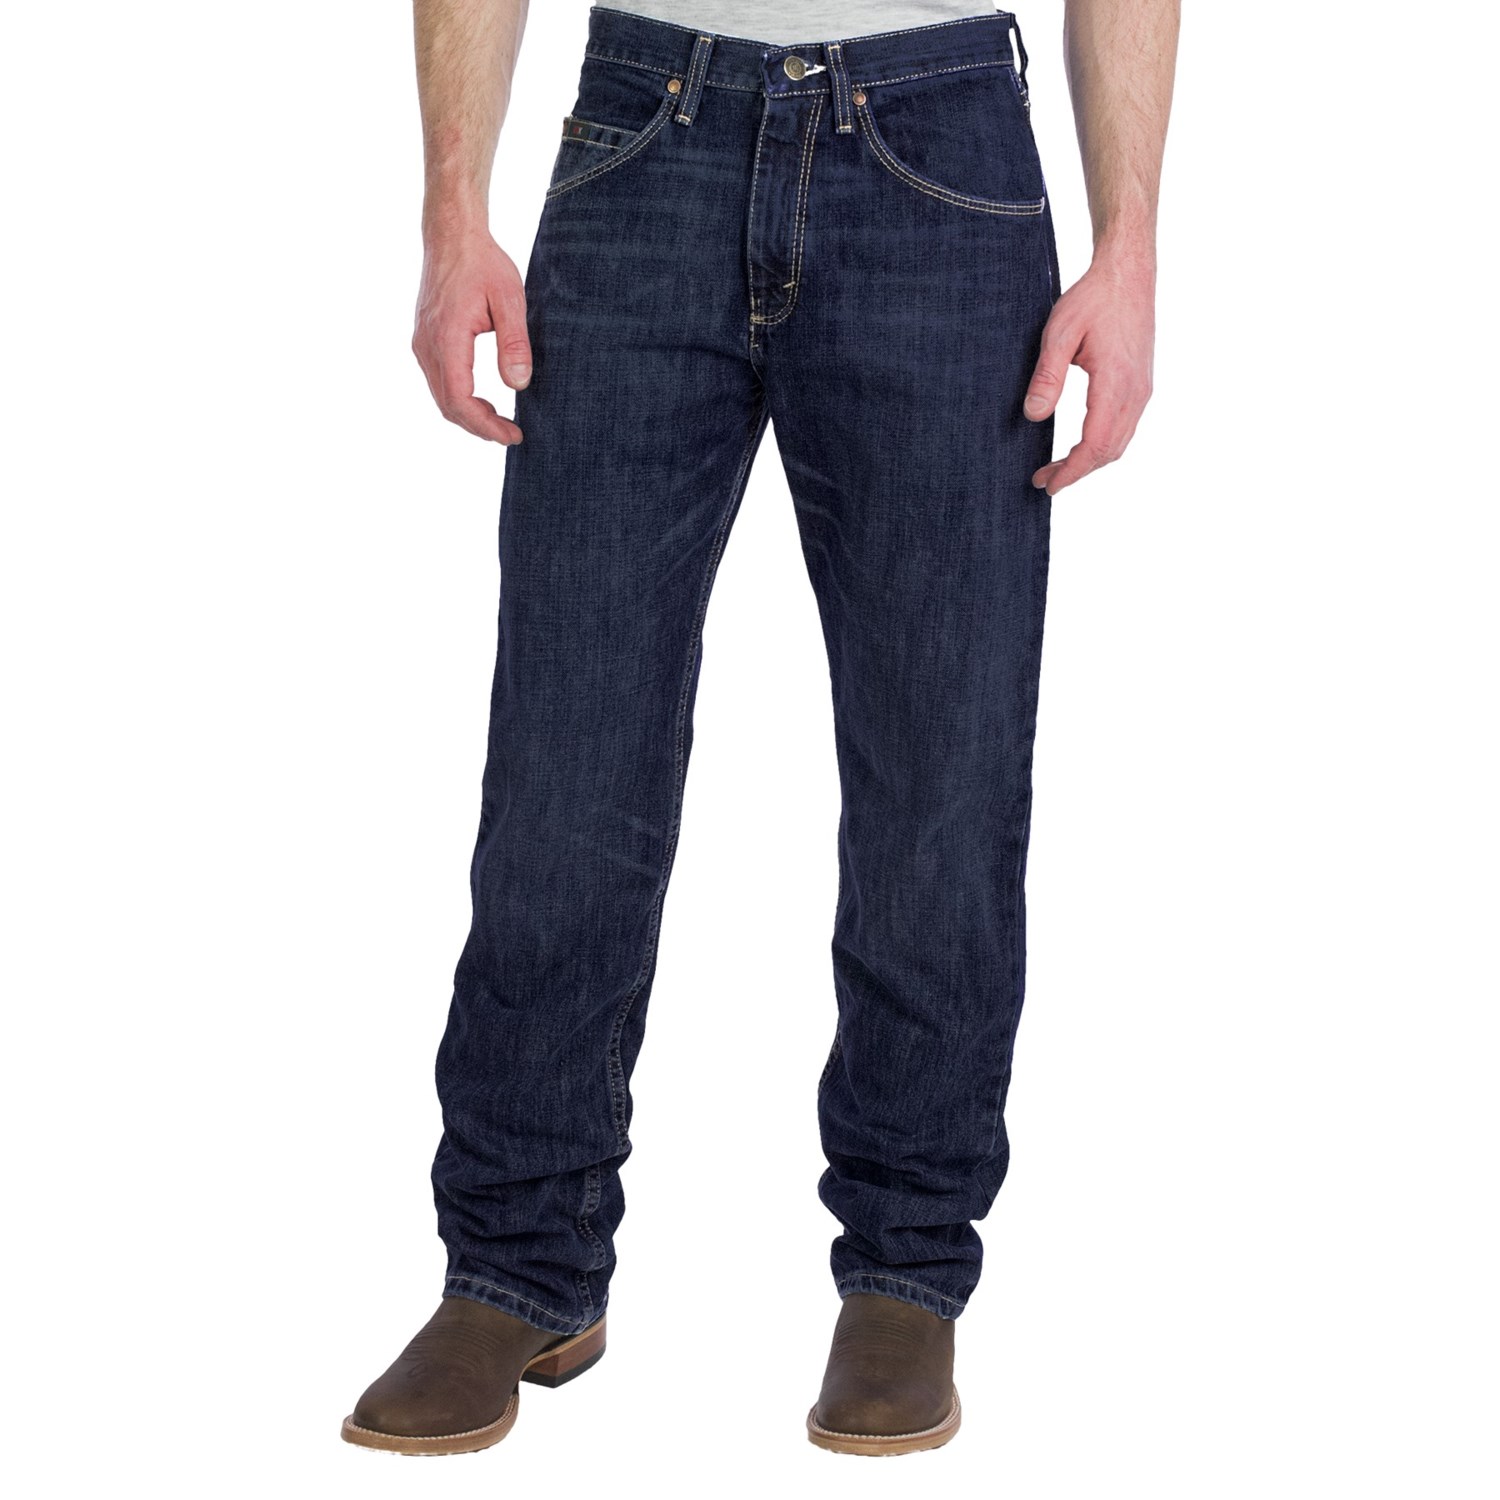 Wrangler 20X Competition Jeans (For Men) - Save 64%